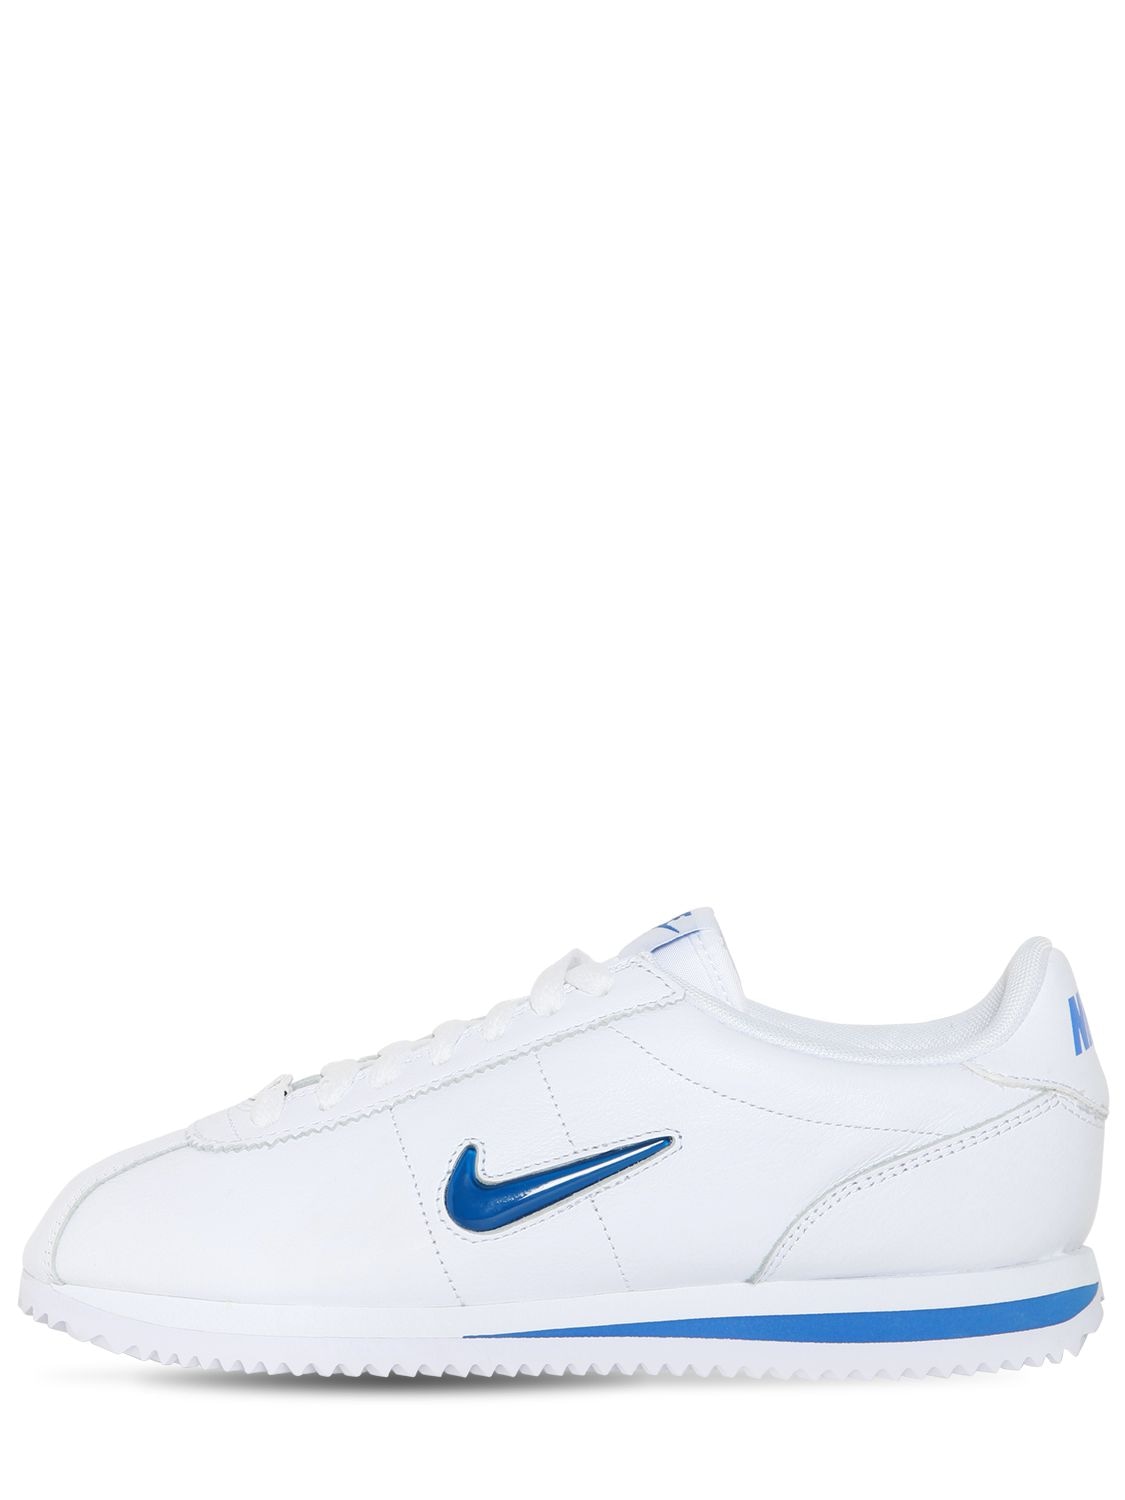 Nike Cortez Basic Jewel 18 Trainers In White/blue